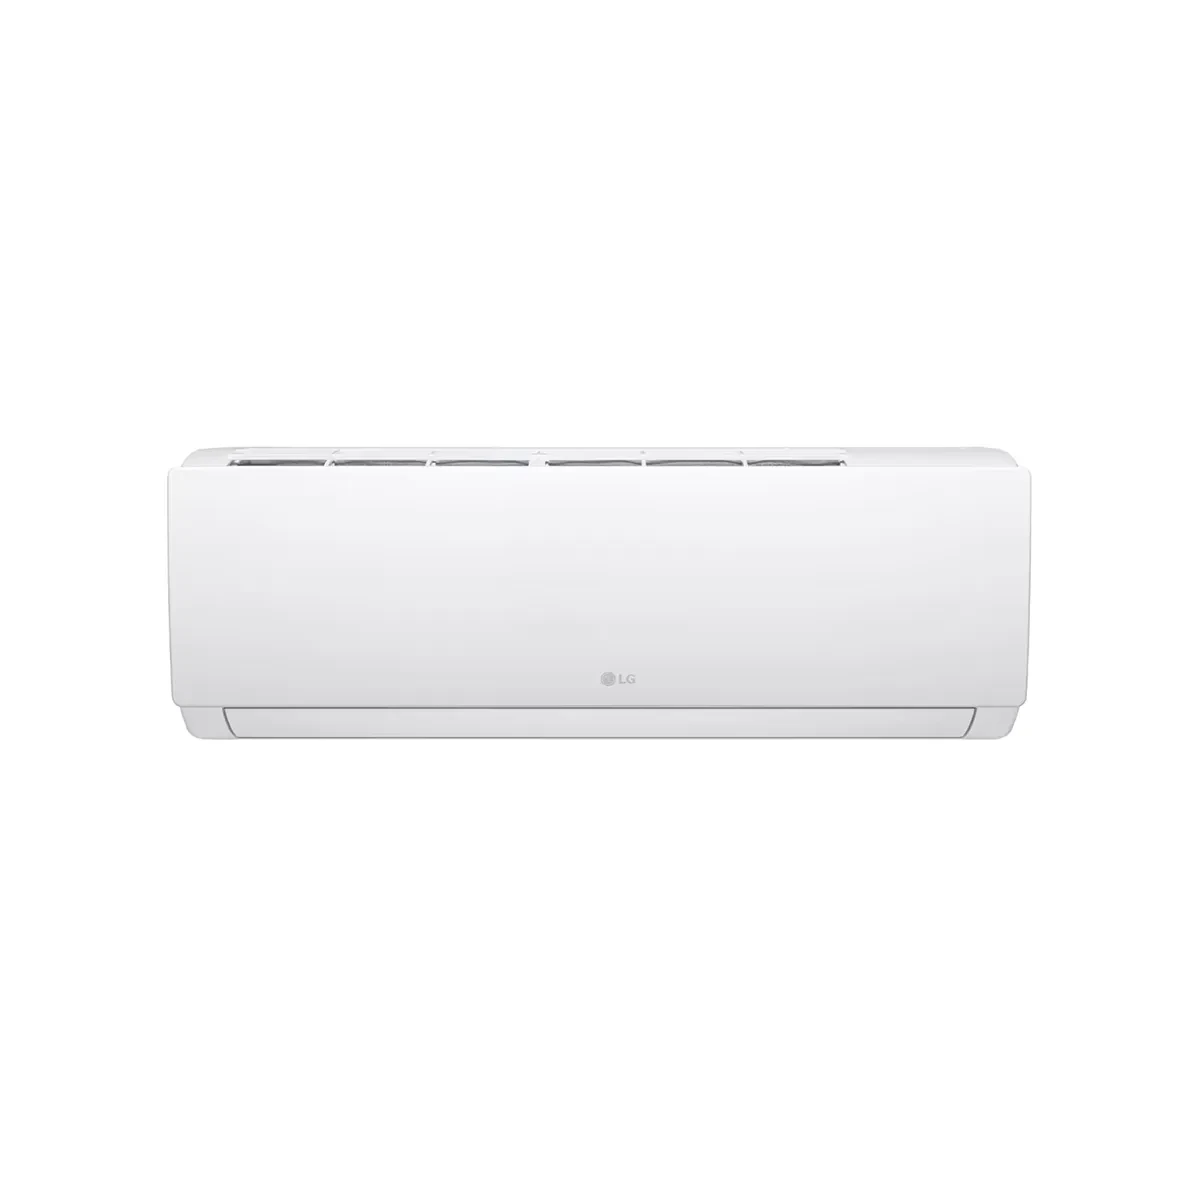 LG - Air condition, Split, HERO 2.25HP,cooling & Heating, white